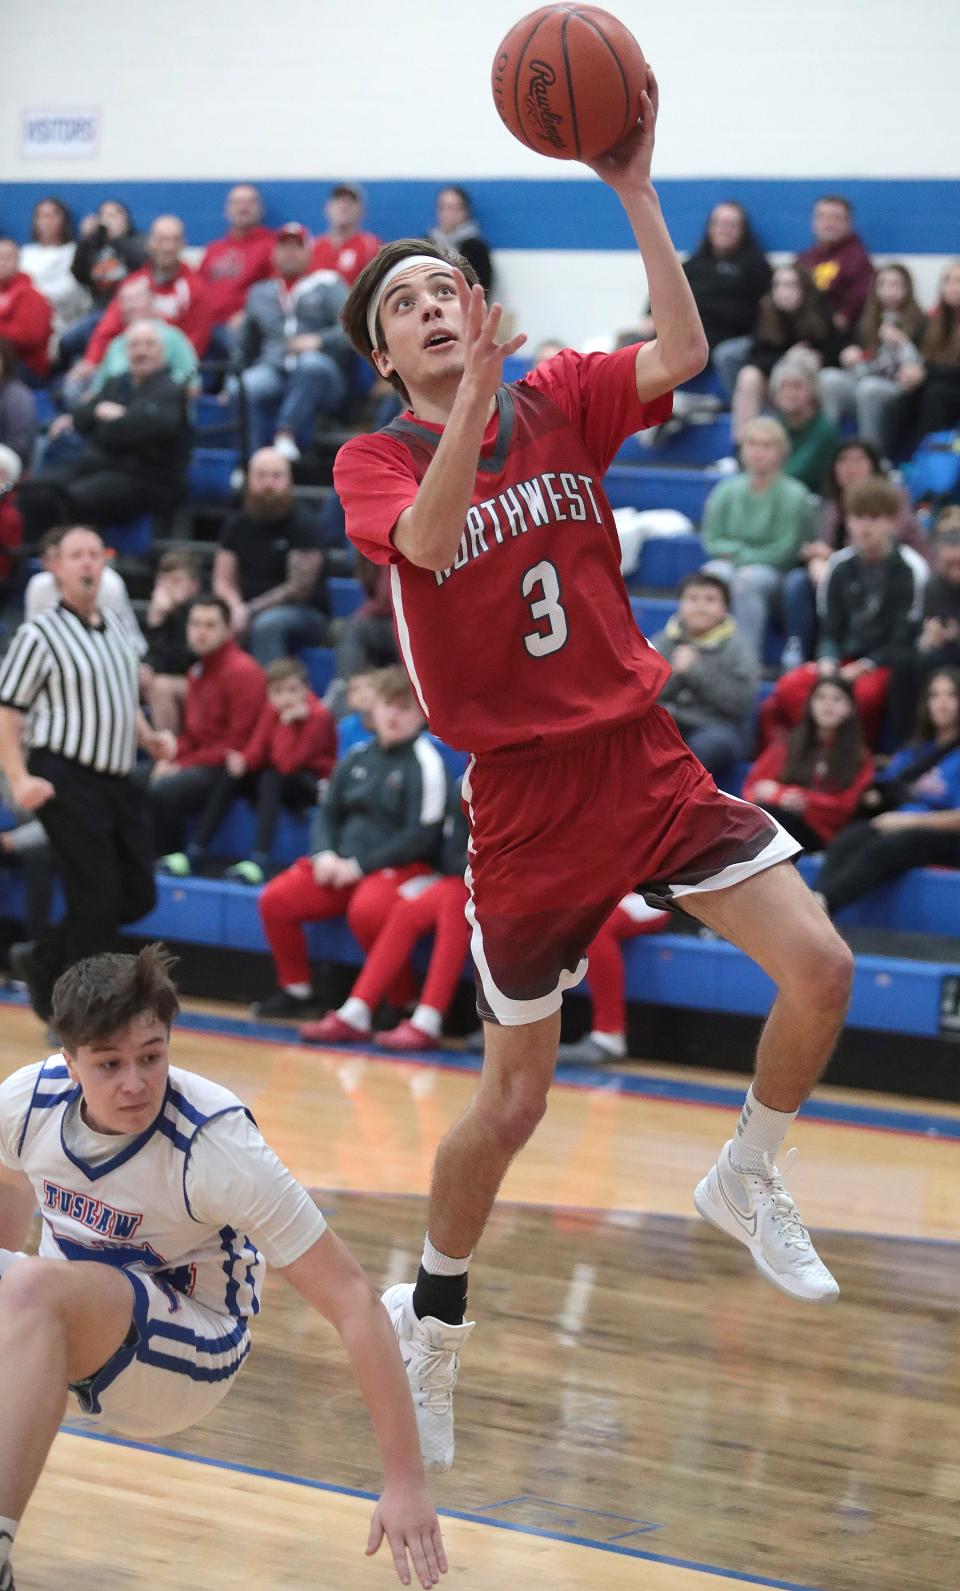 Northwest's Aidan Barna goes to the hoop on a fast break with defense from Tuslaw's Max McMerrell in the second half at Tuslaw Friday, January 21, 2022.